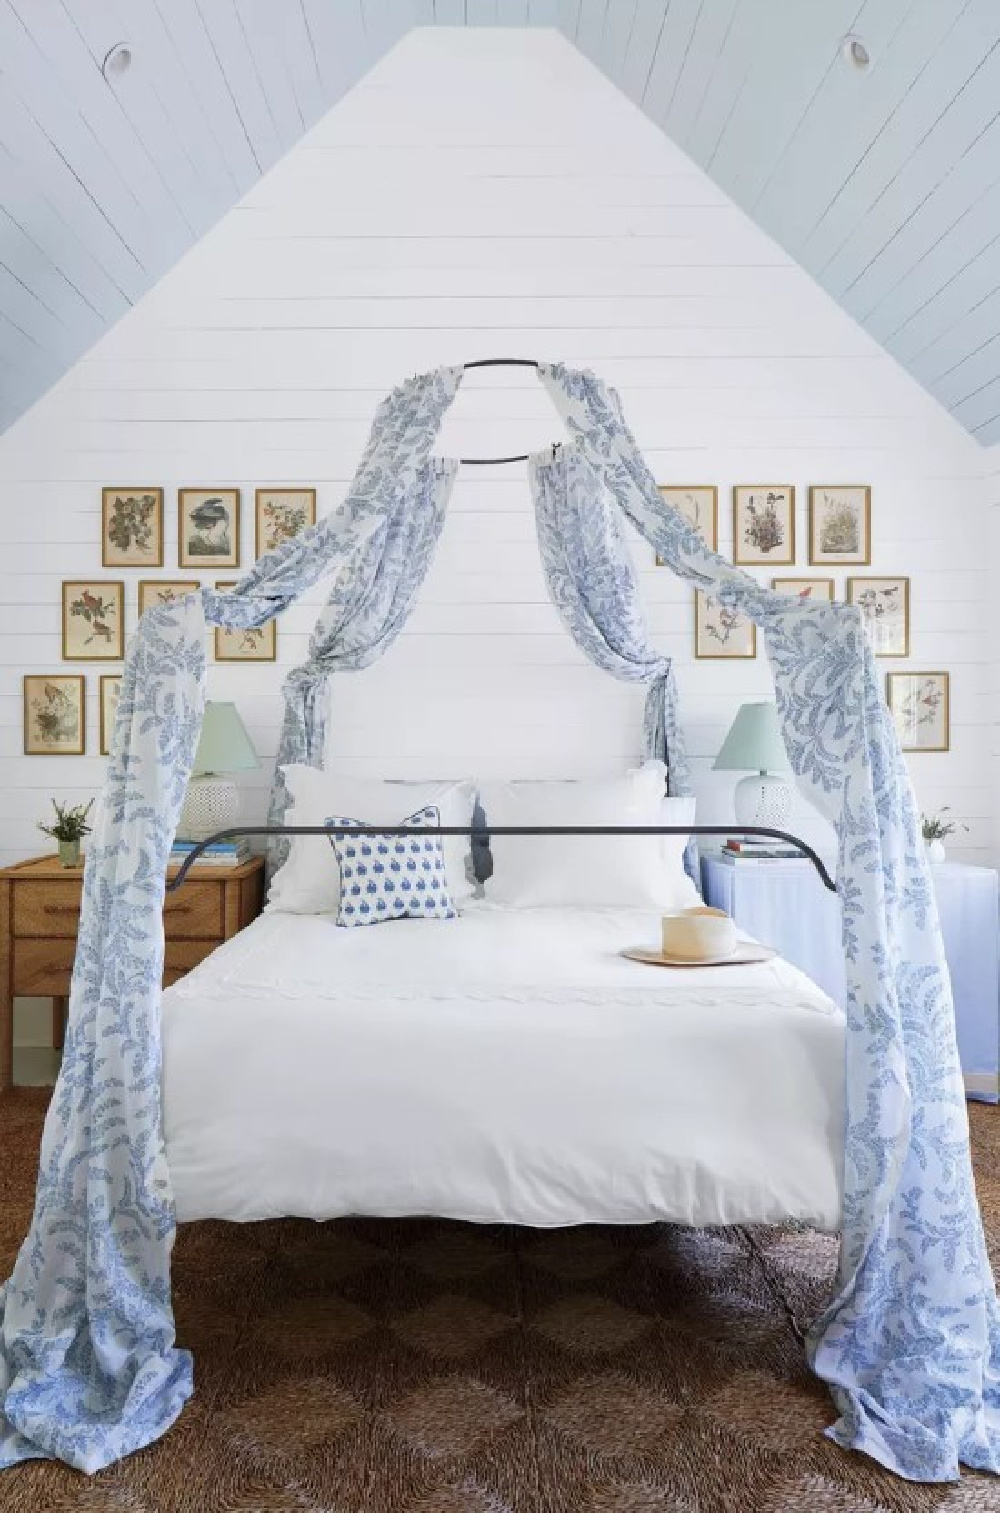 Lofty ceilinged bedroom with Colefax & Fowler Melina fabric and vintage framed bird prints - Julia Berolzheimer's home in Southern Living (photo: Hector Manuel Sanchez). #bmsimplywhite